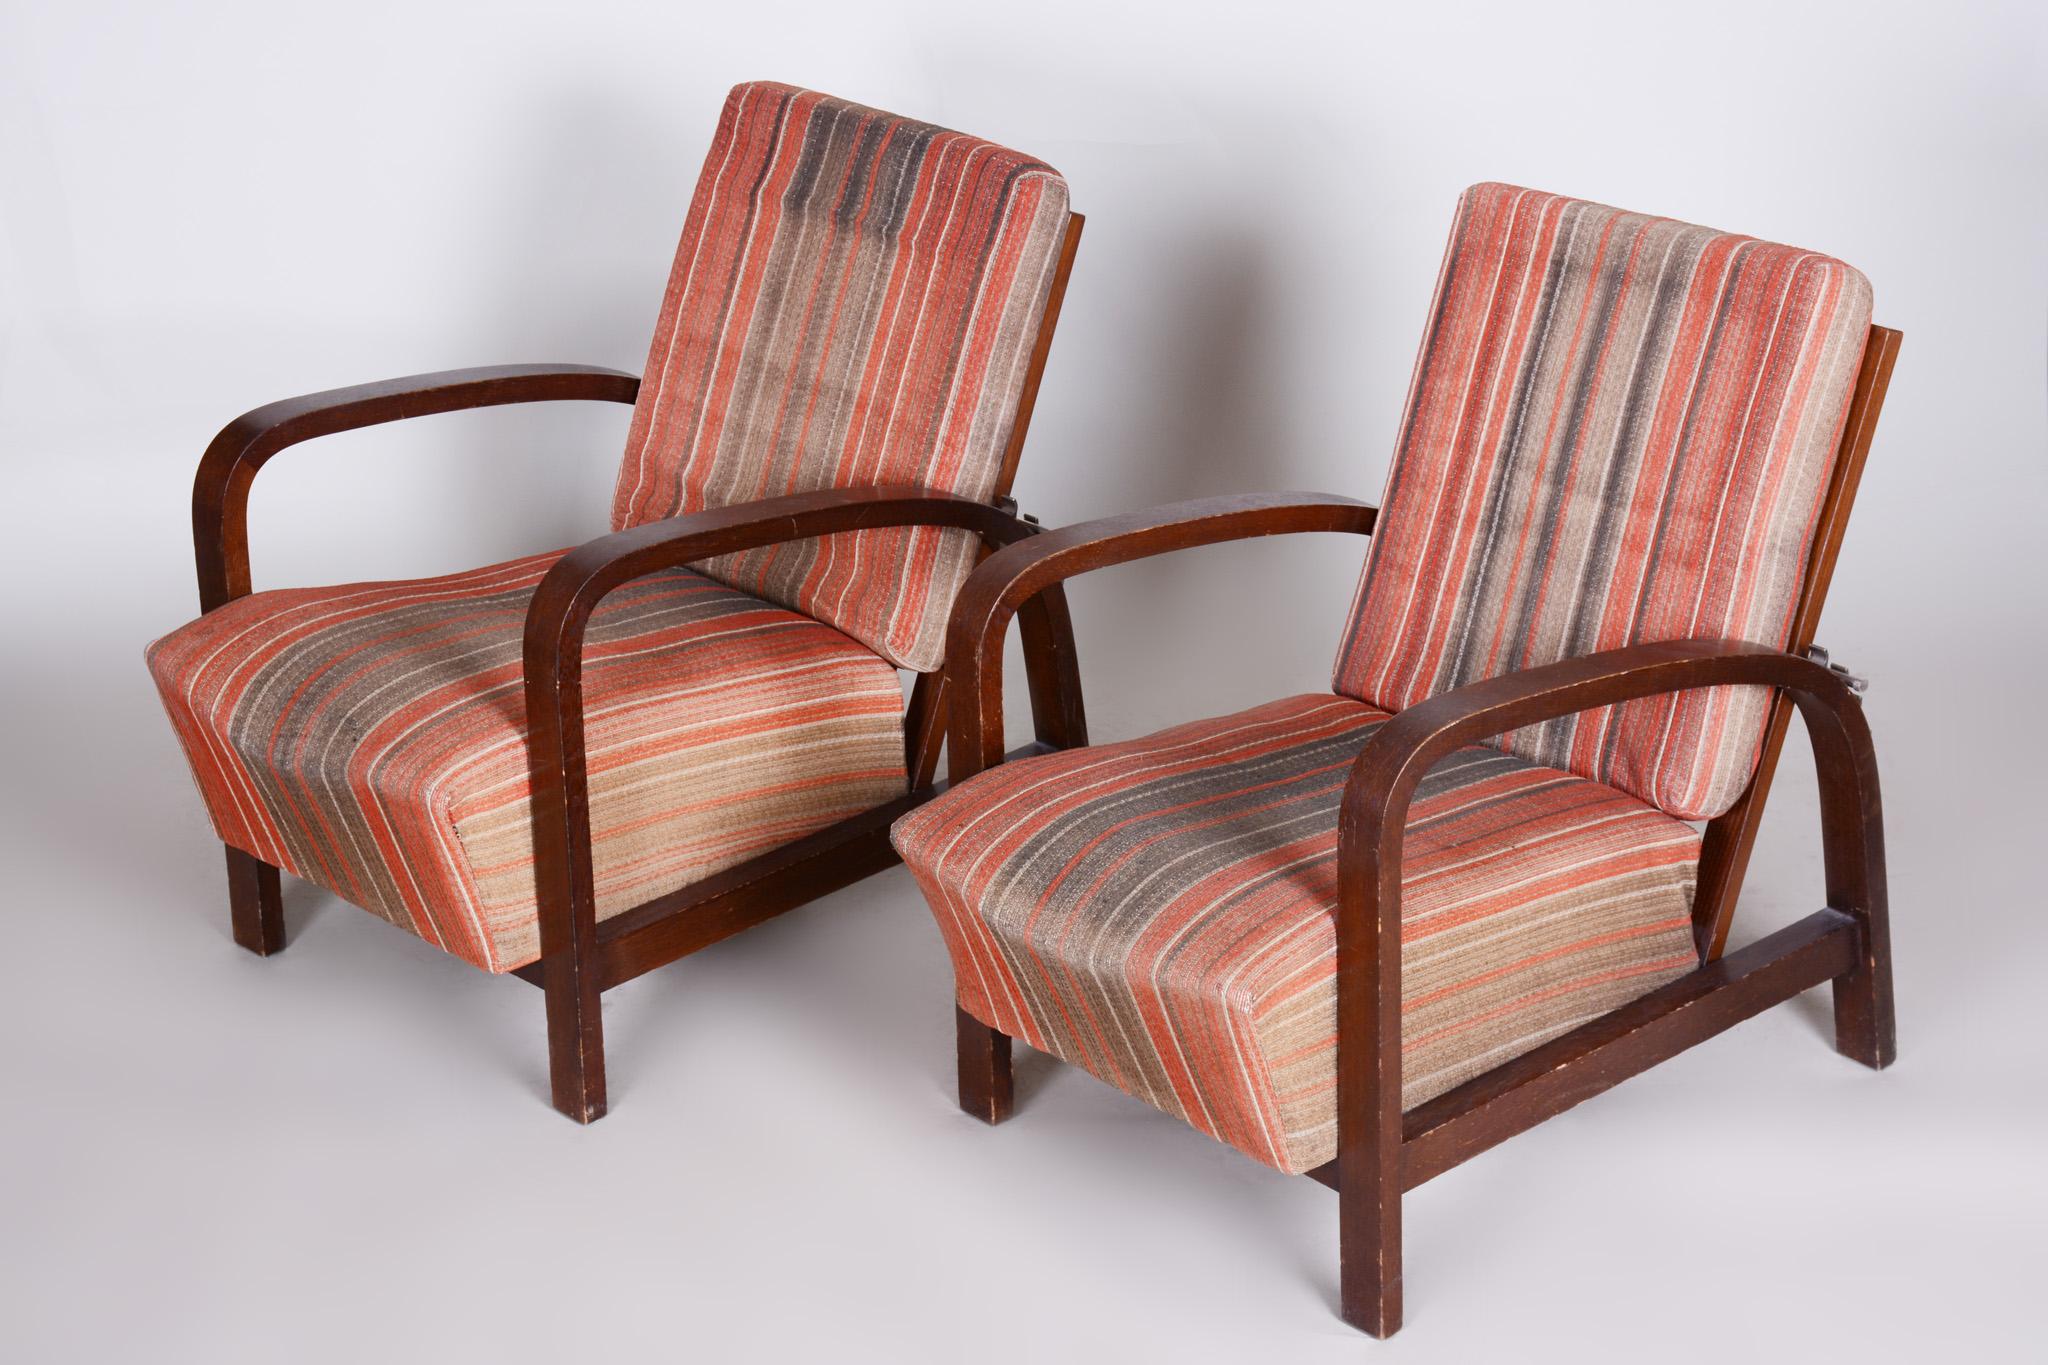 Czech Art Deco Oak Armchairs 1930s, Original Well Preserved Condition For Sale 2